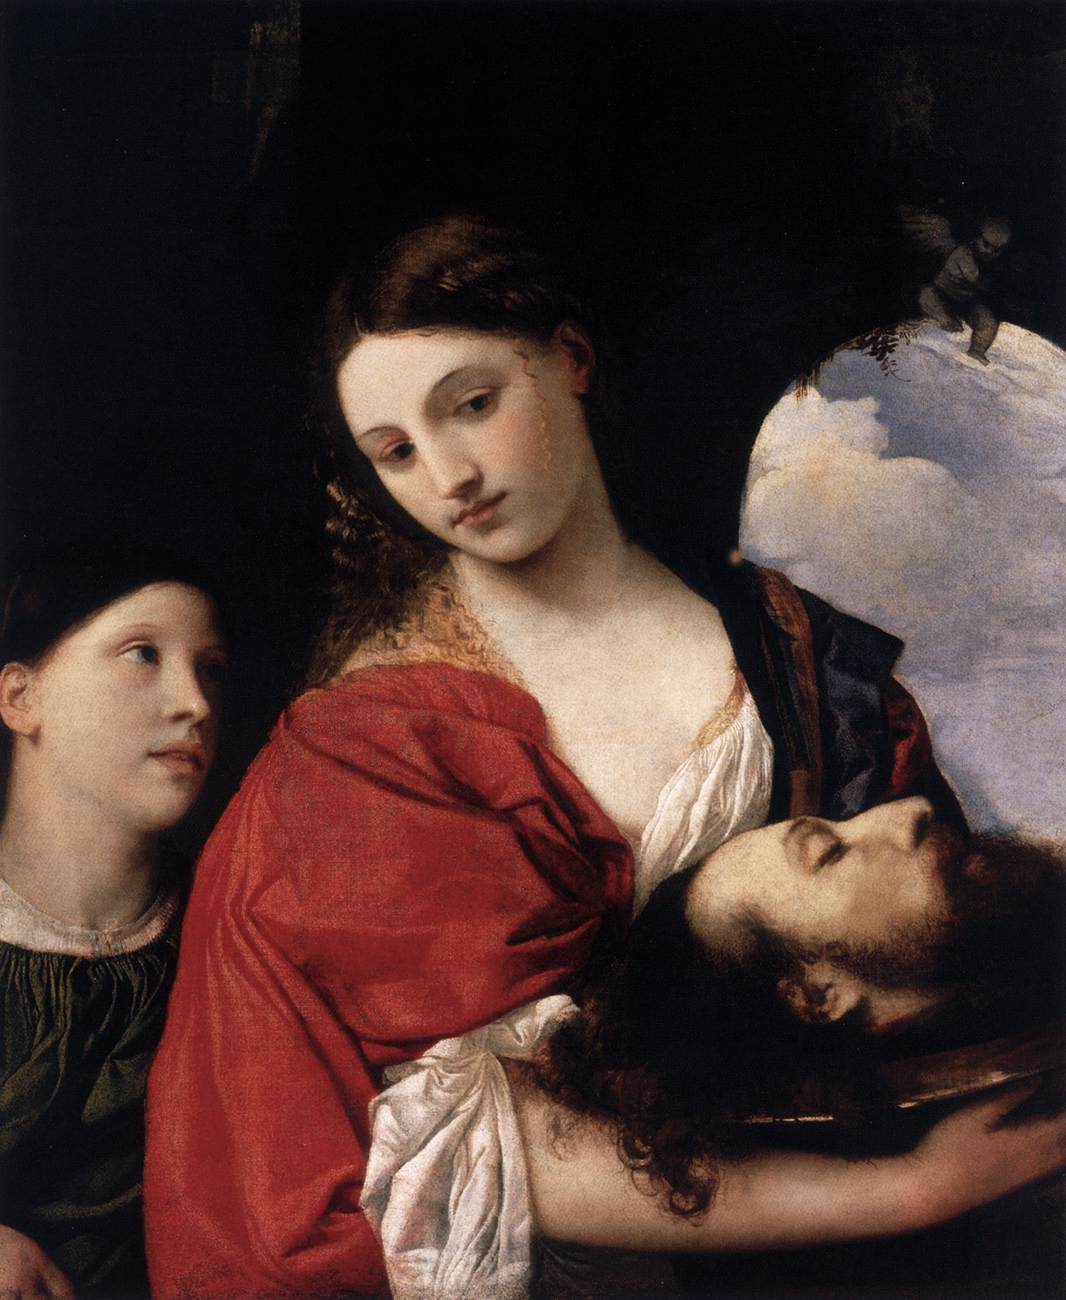 The original Judith and Holofernes by Titian